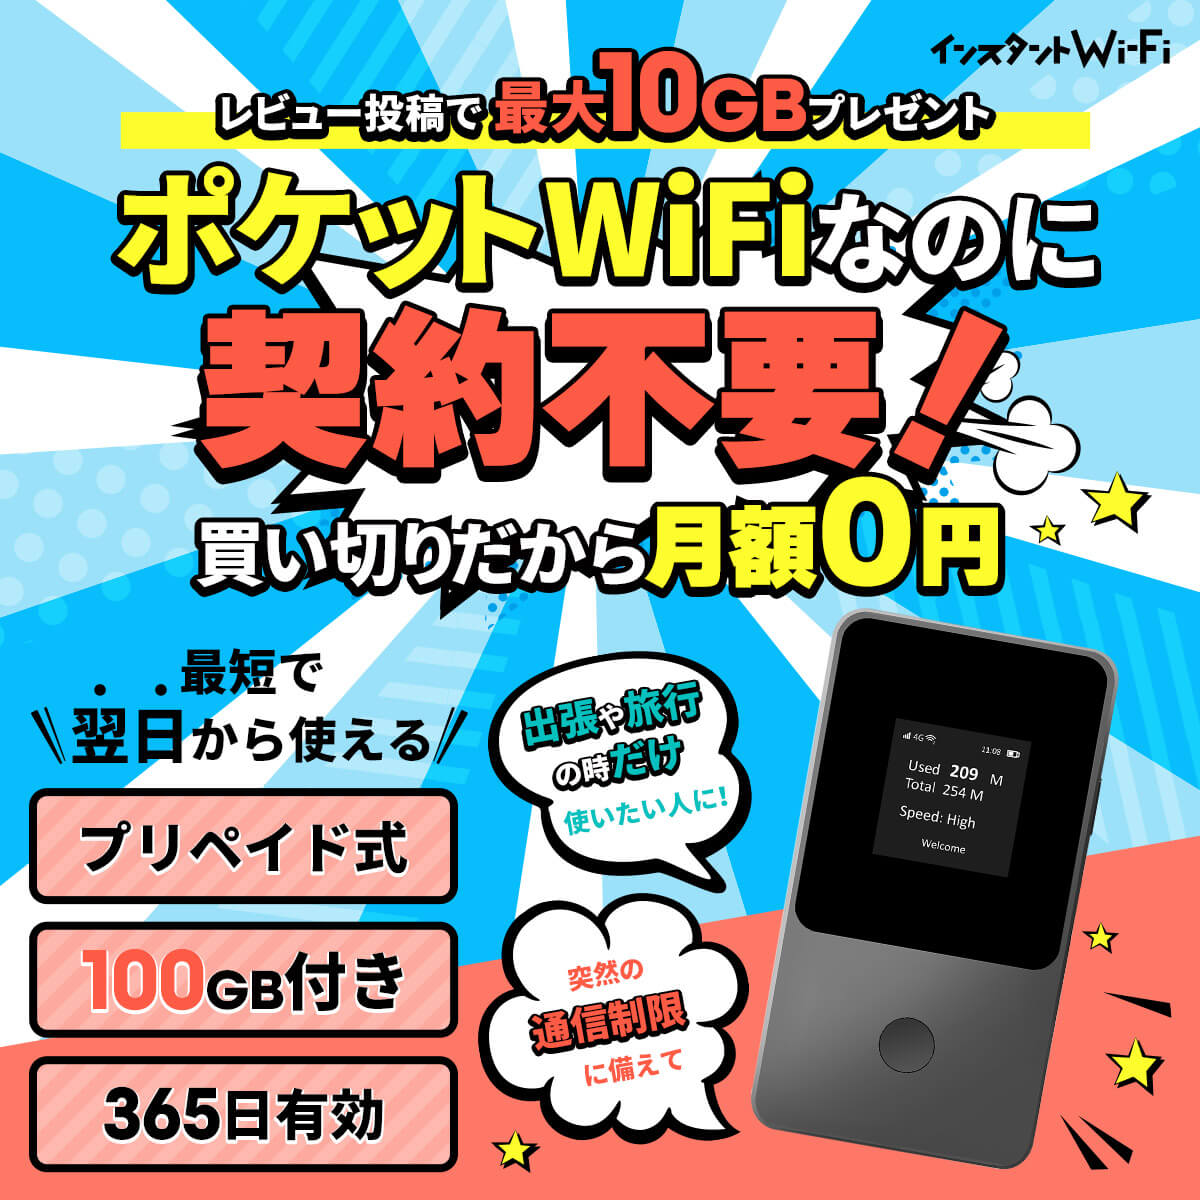  data communication attaching pocket WiFi instant Wi-Fi buying cut .plipeido type mobile router term of validity 365 day Giga addition Charge 100GB plan + addition 5GB present 